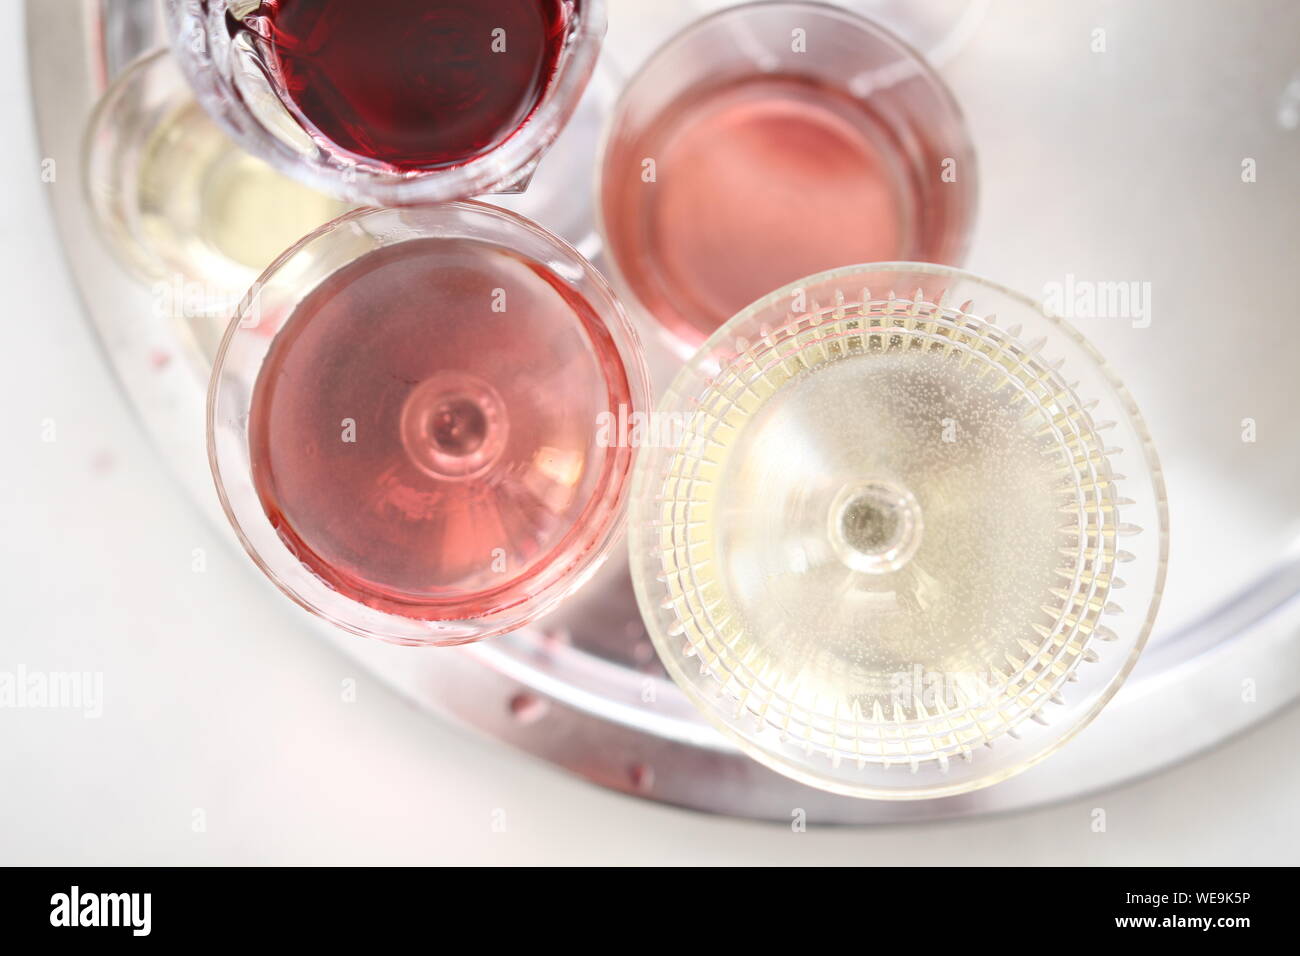 High Angle View Of Alcohol In Glasses Stock Photo